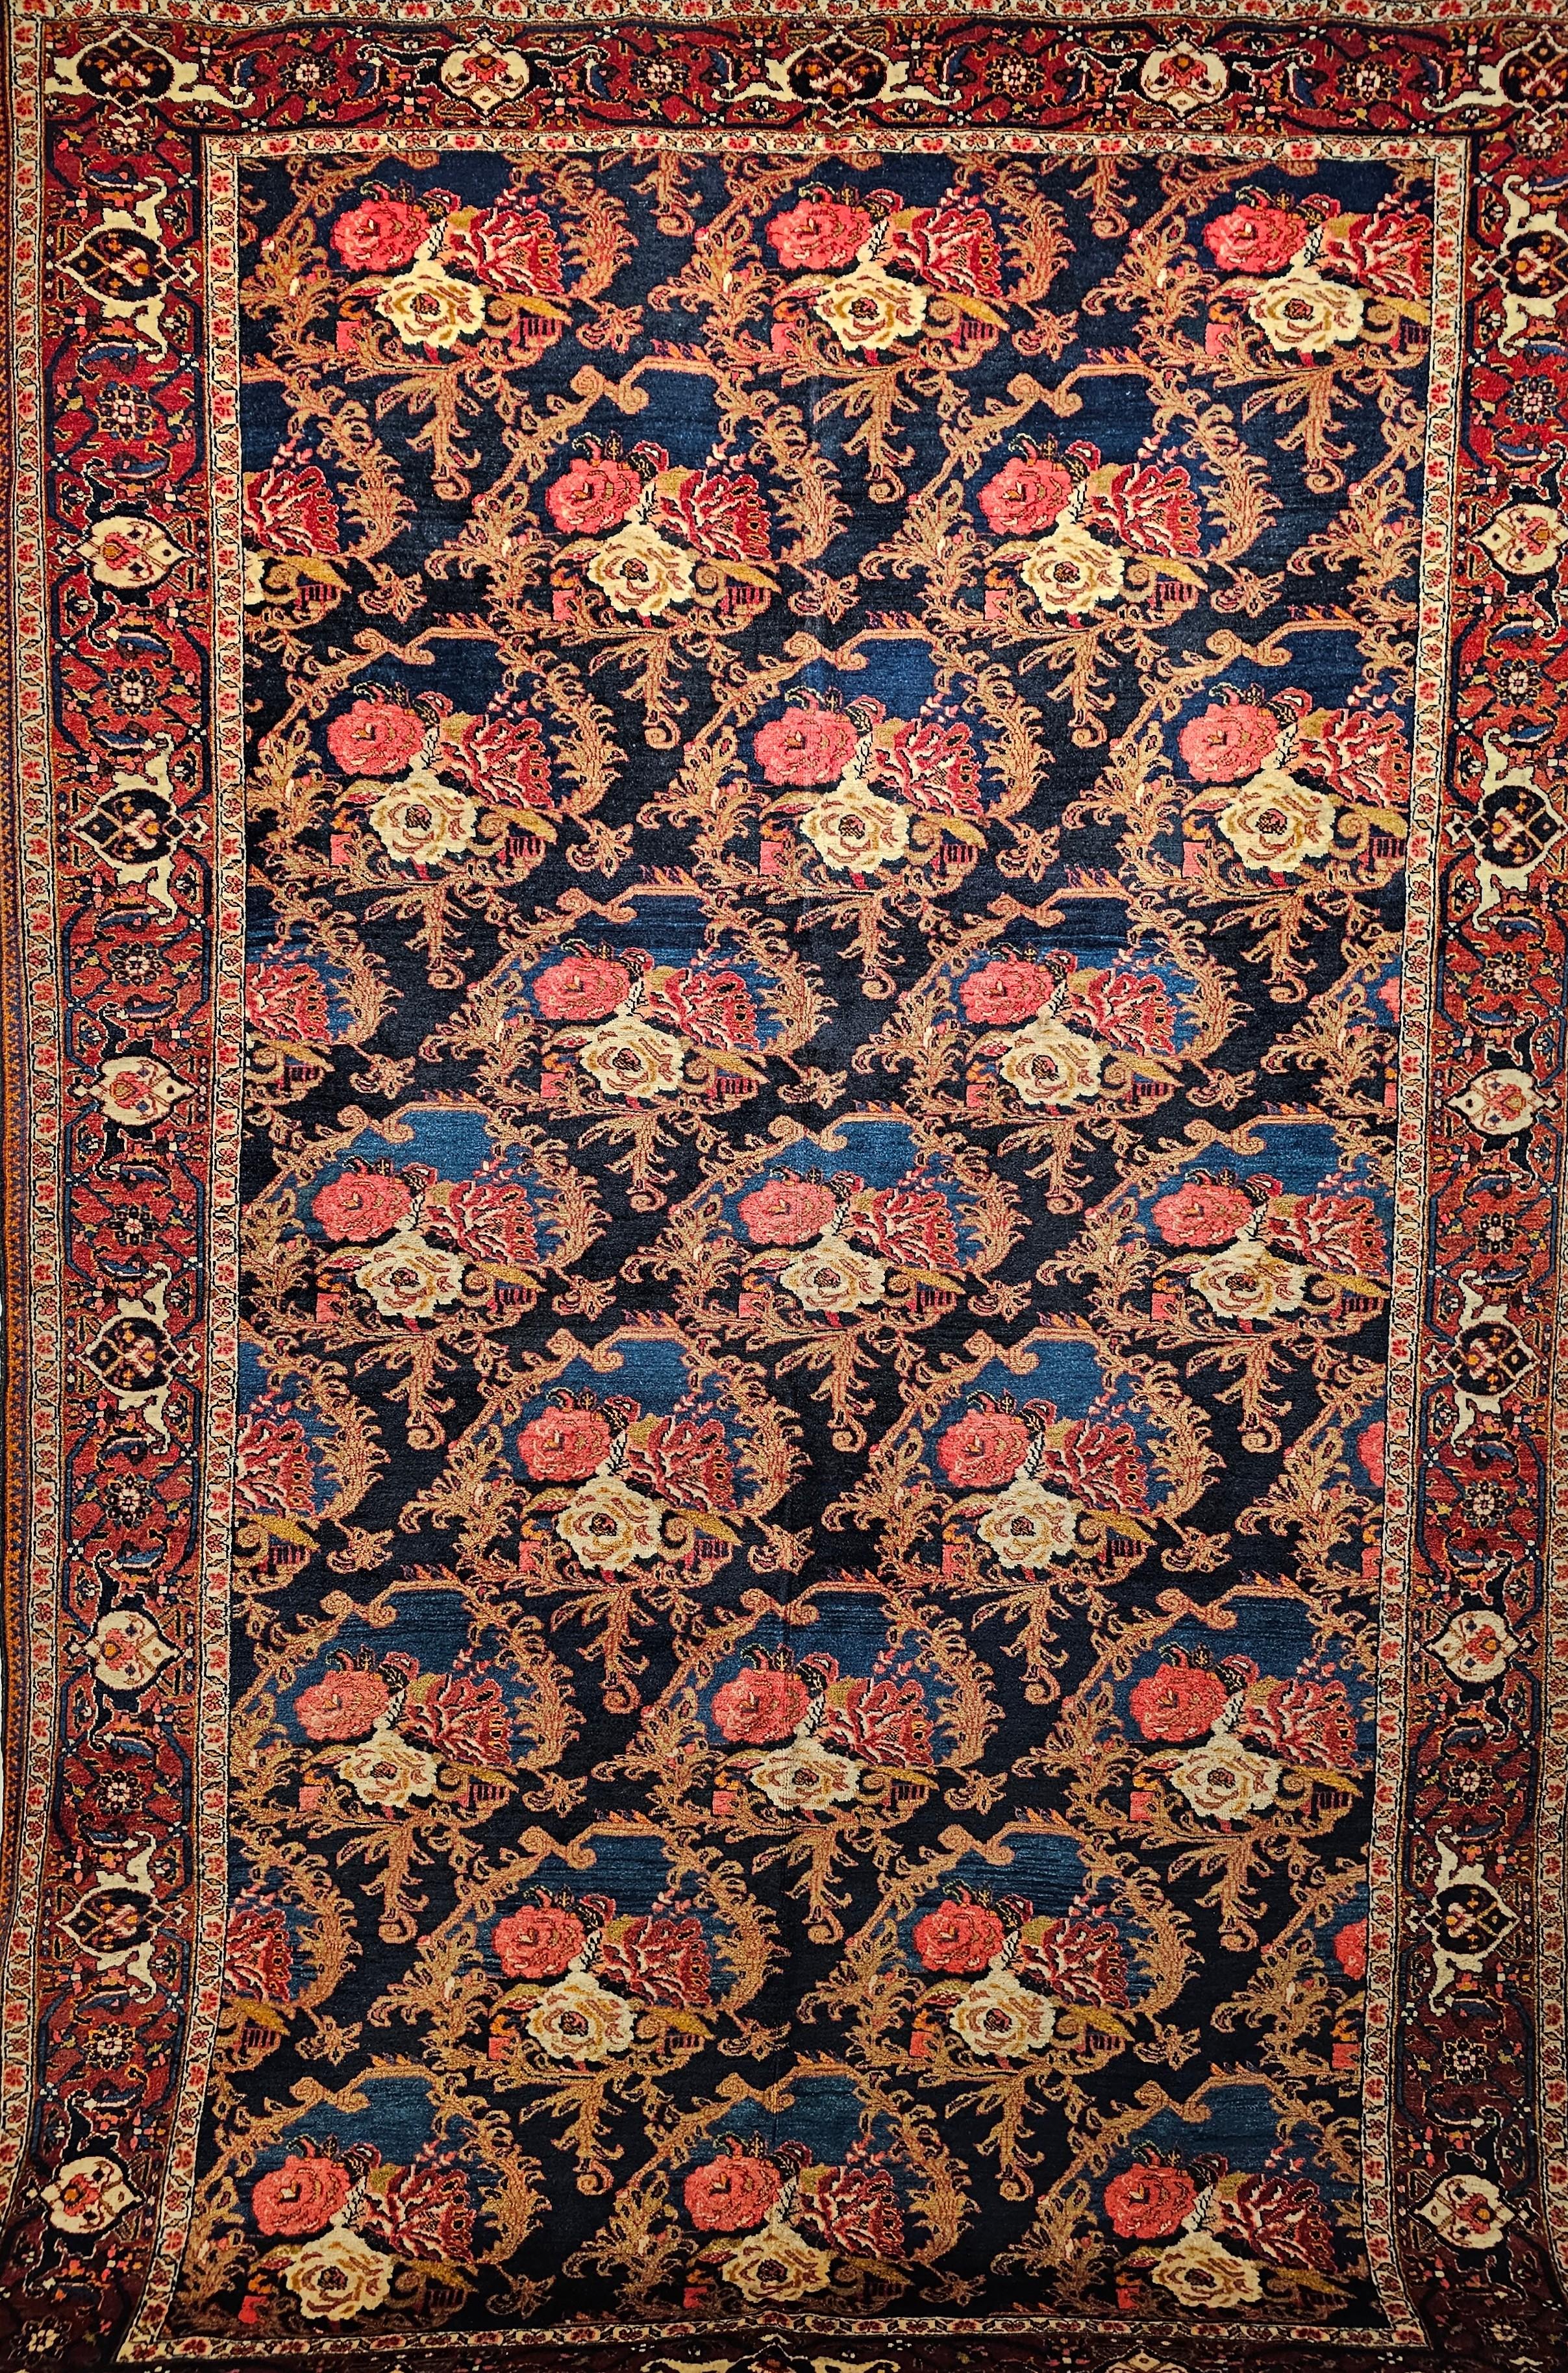 The vintage Tabriz room size rug is in a 